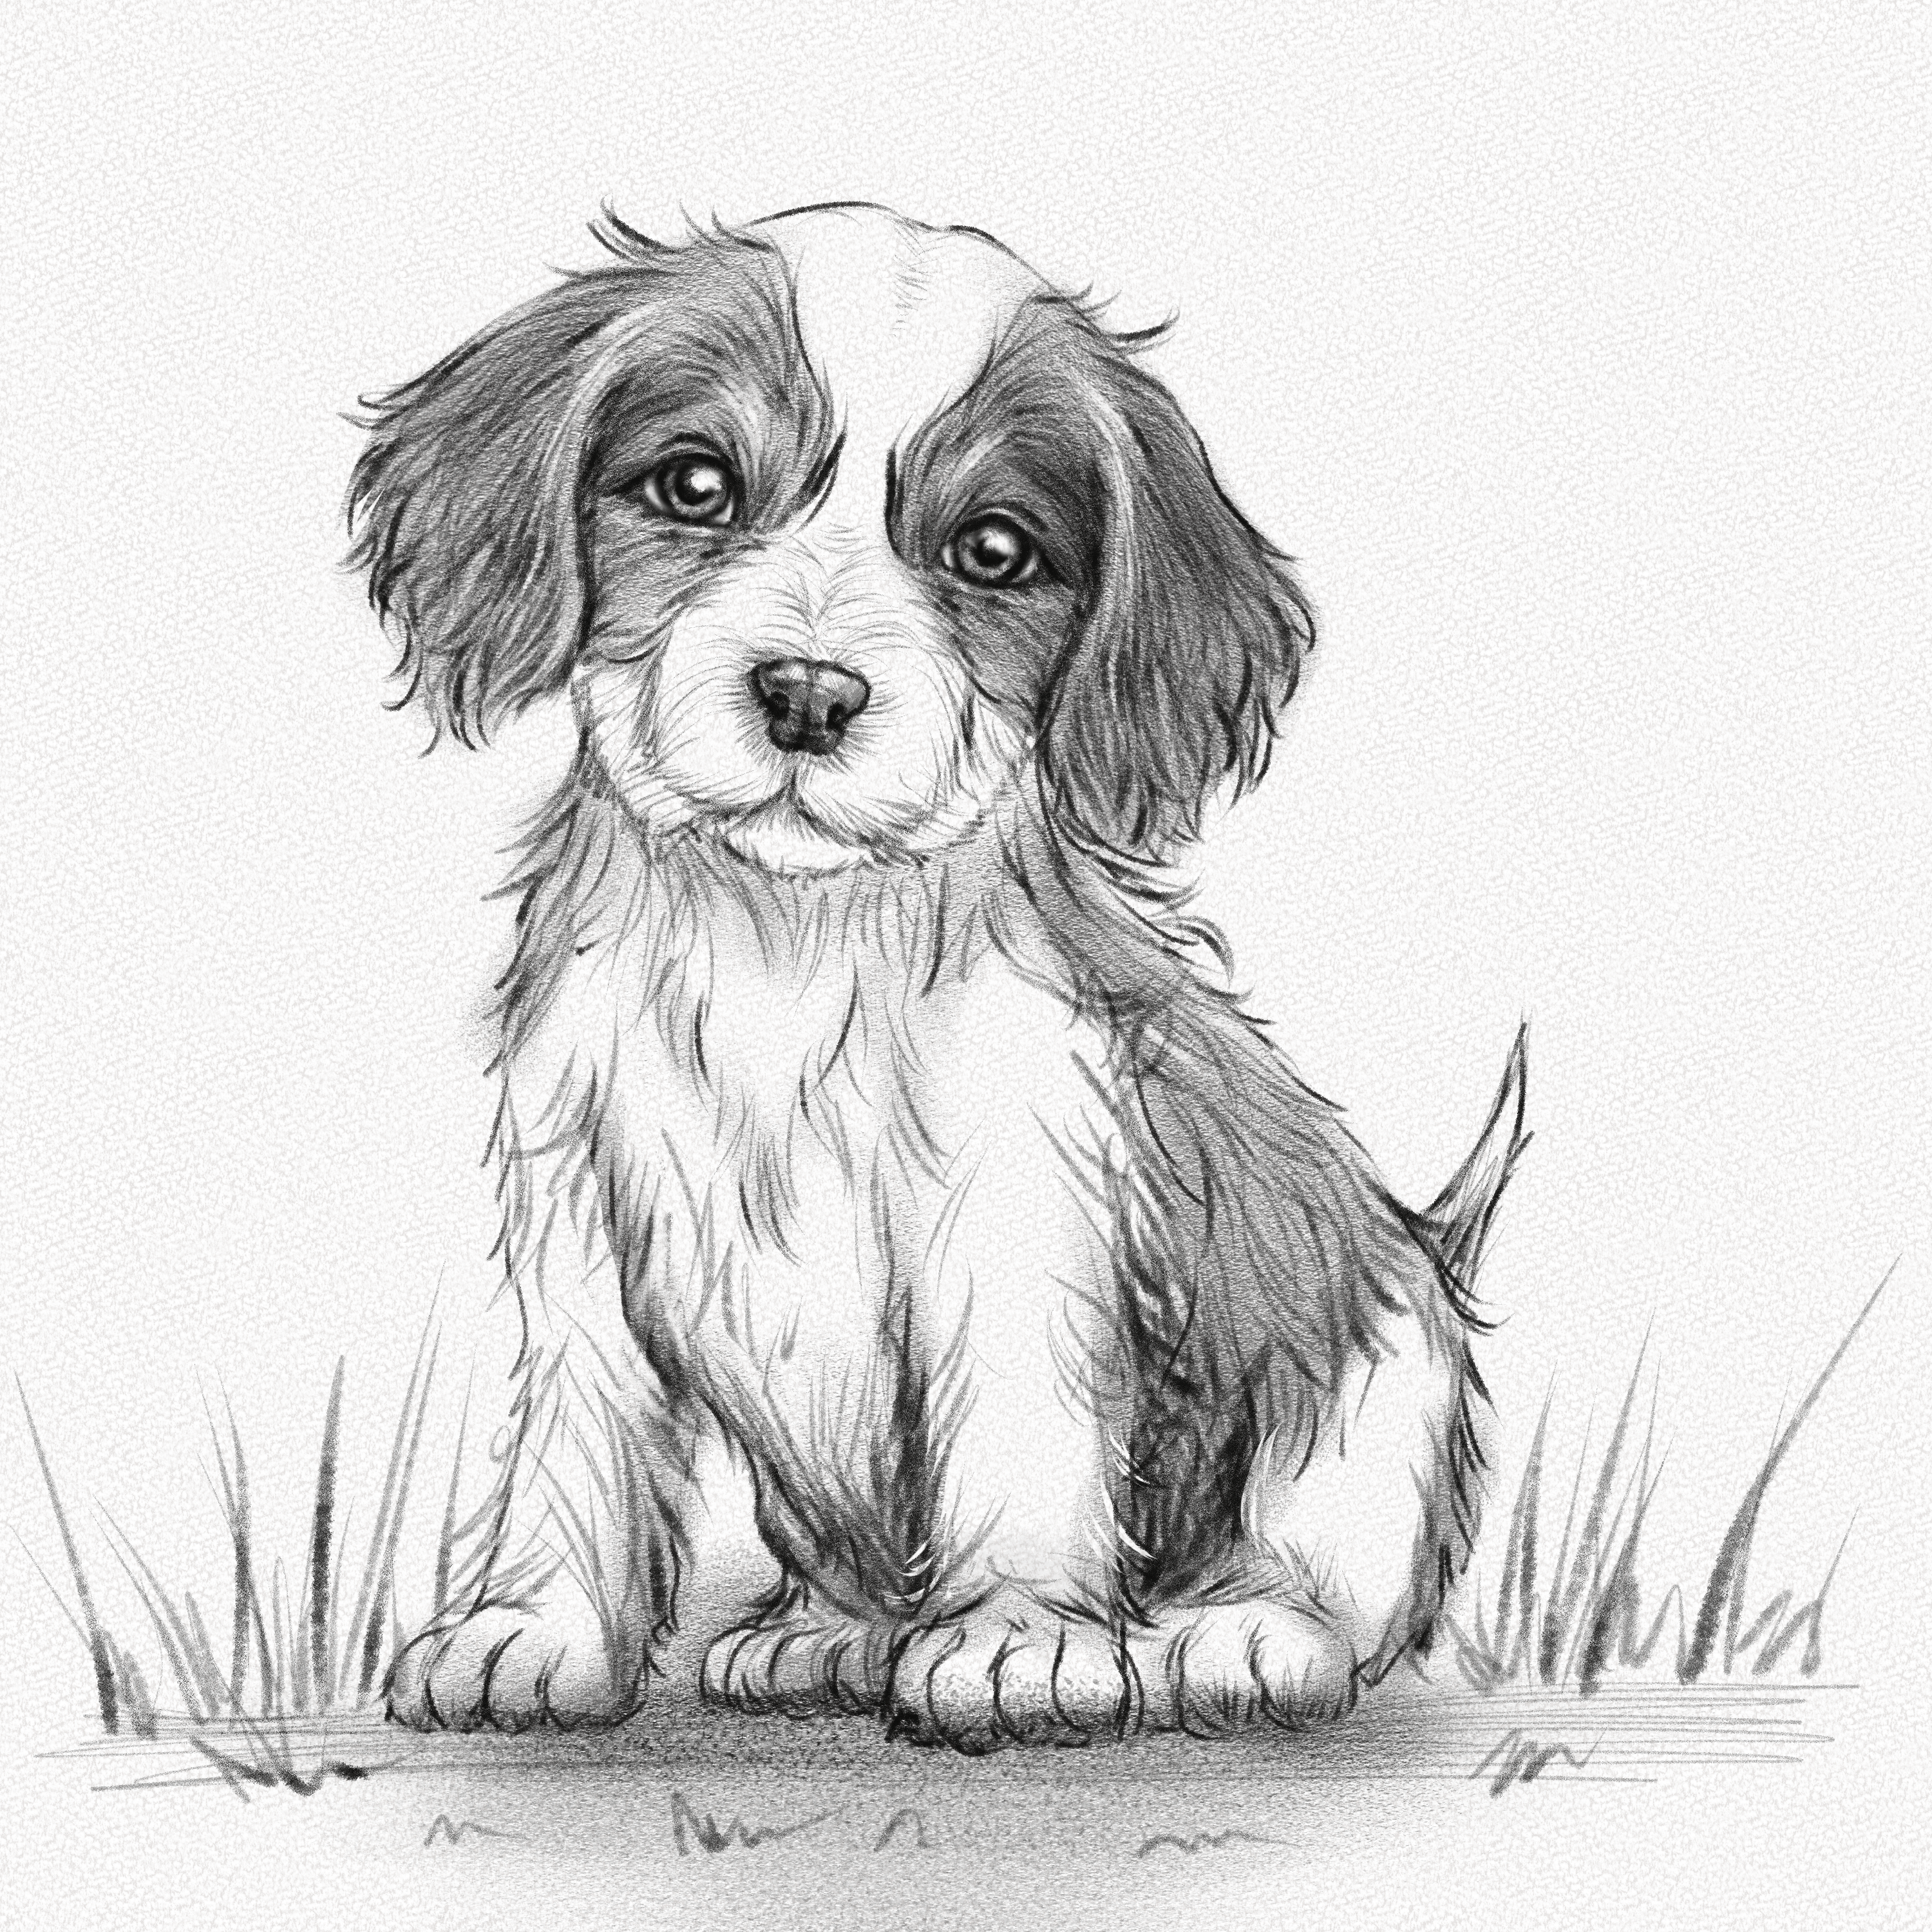 How to Draw a Dog Step by Step - EasyLineDrawing